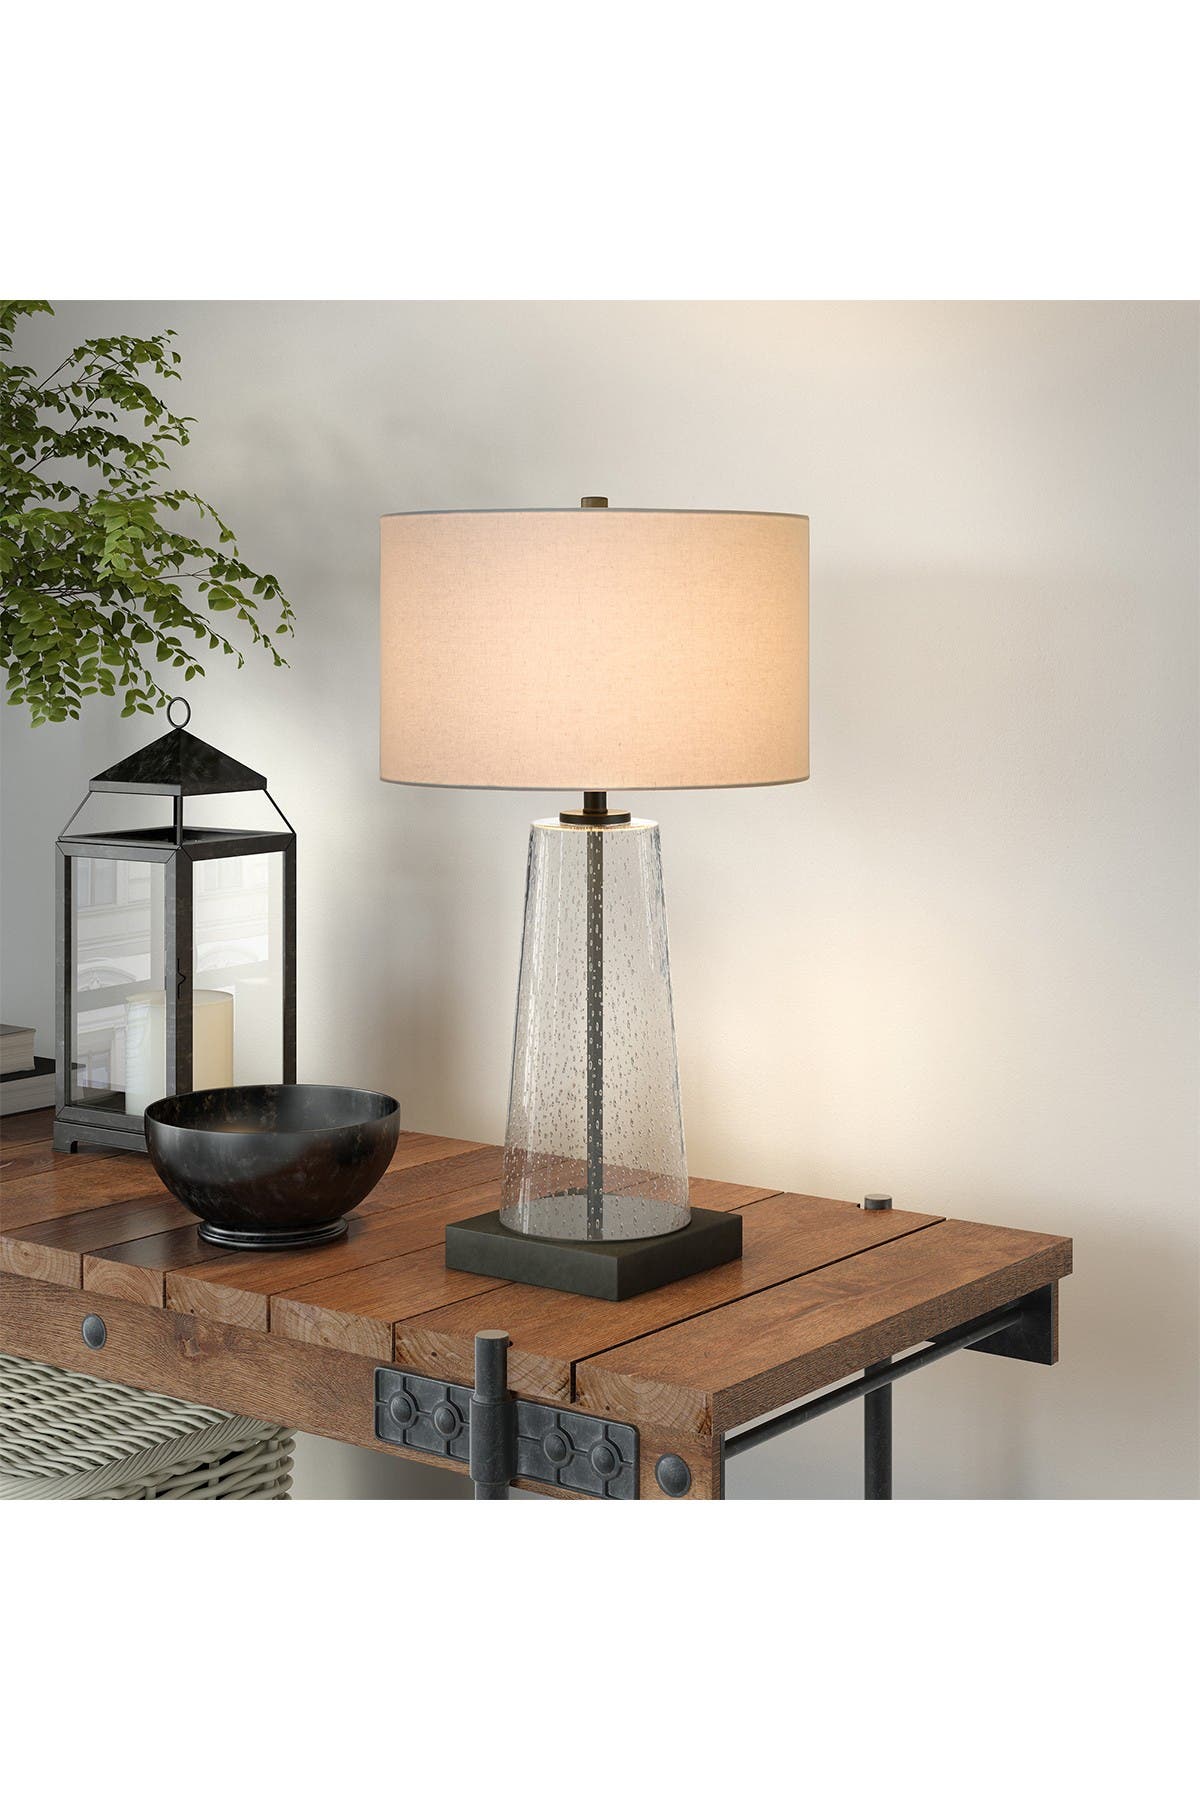 Addison And Lane Dax Tapered Seeded Glass Table Lamp